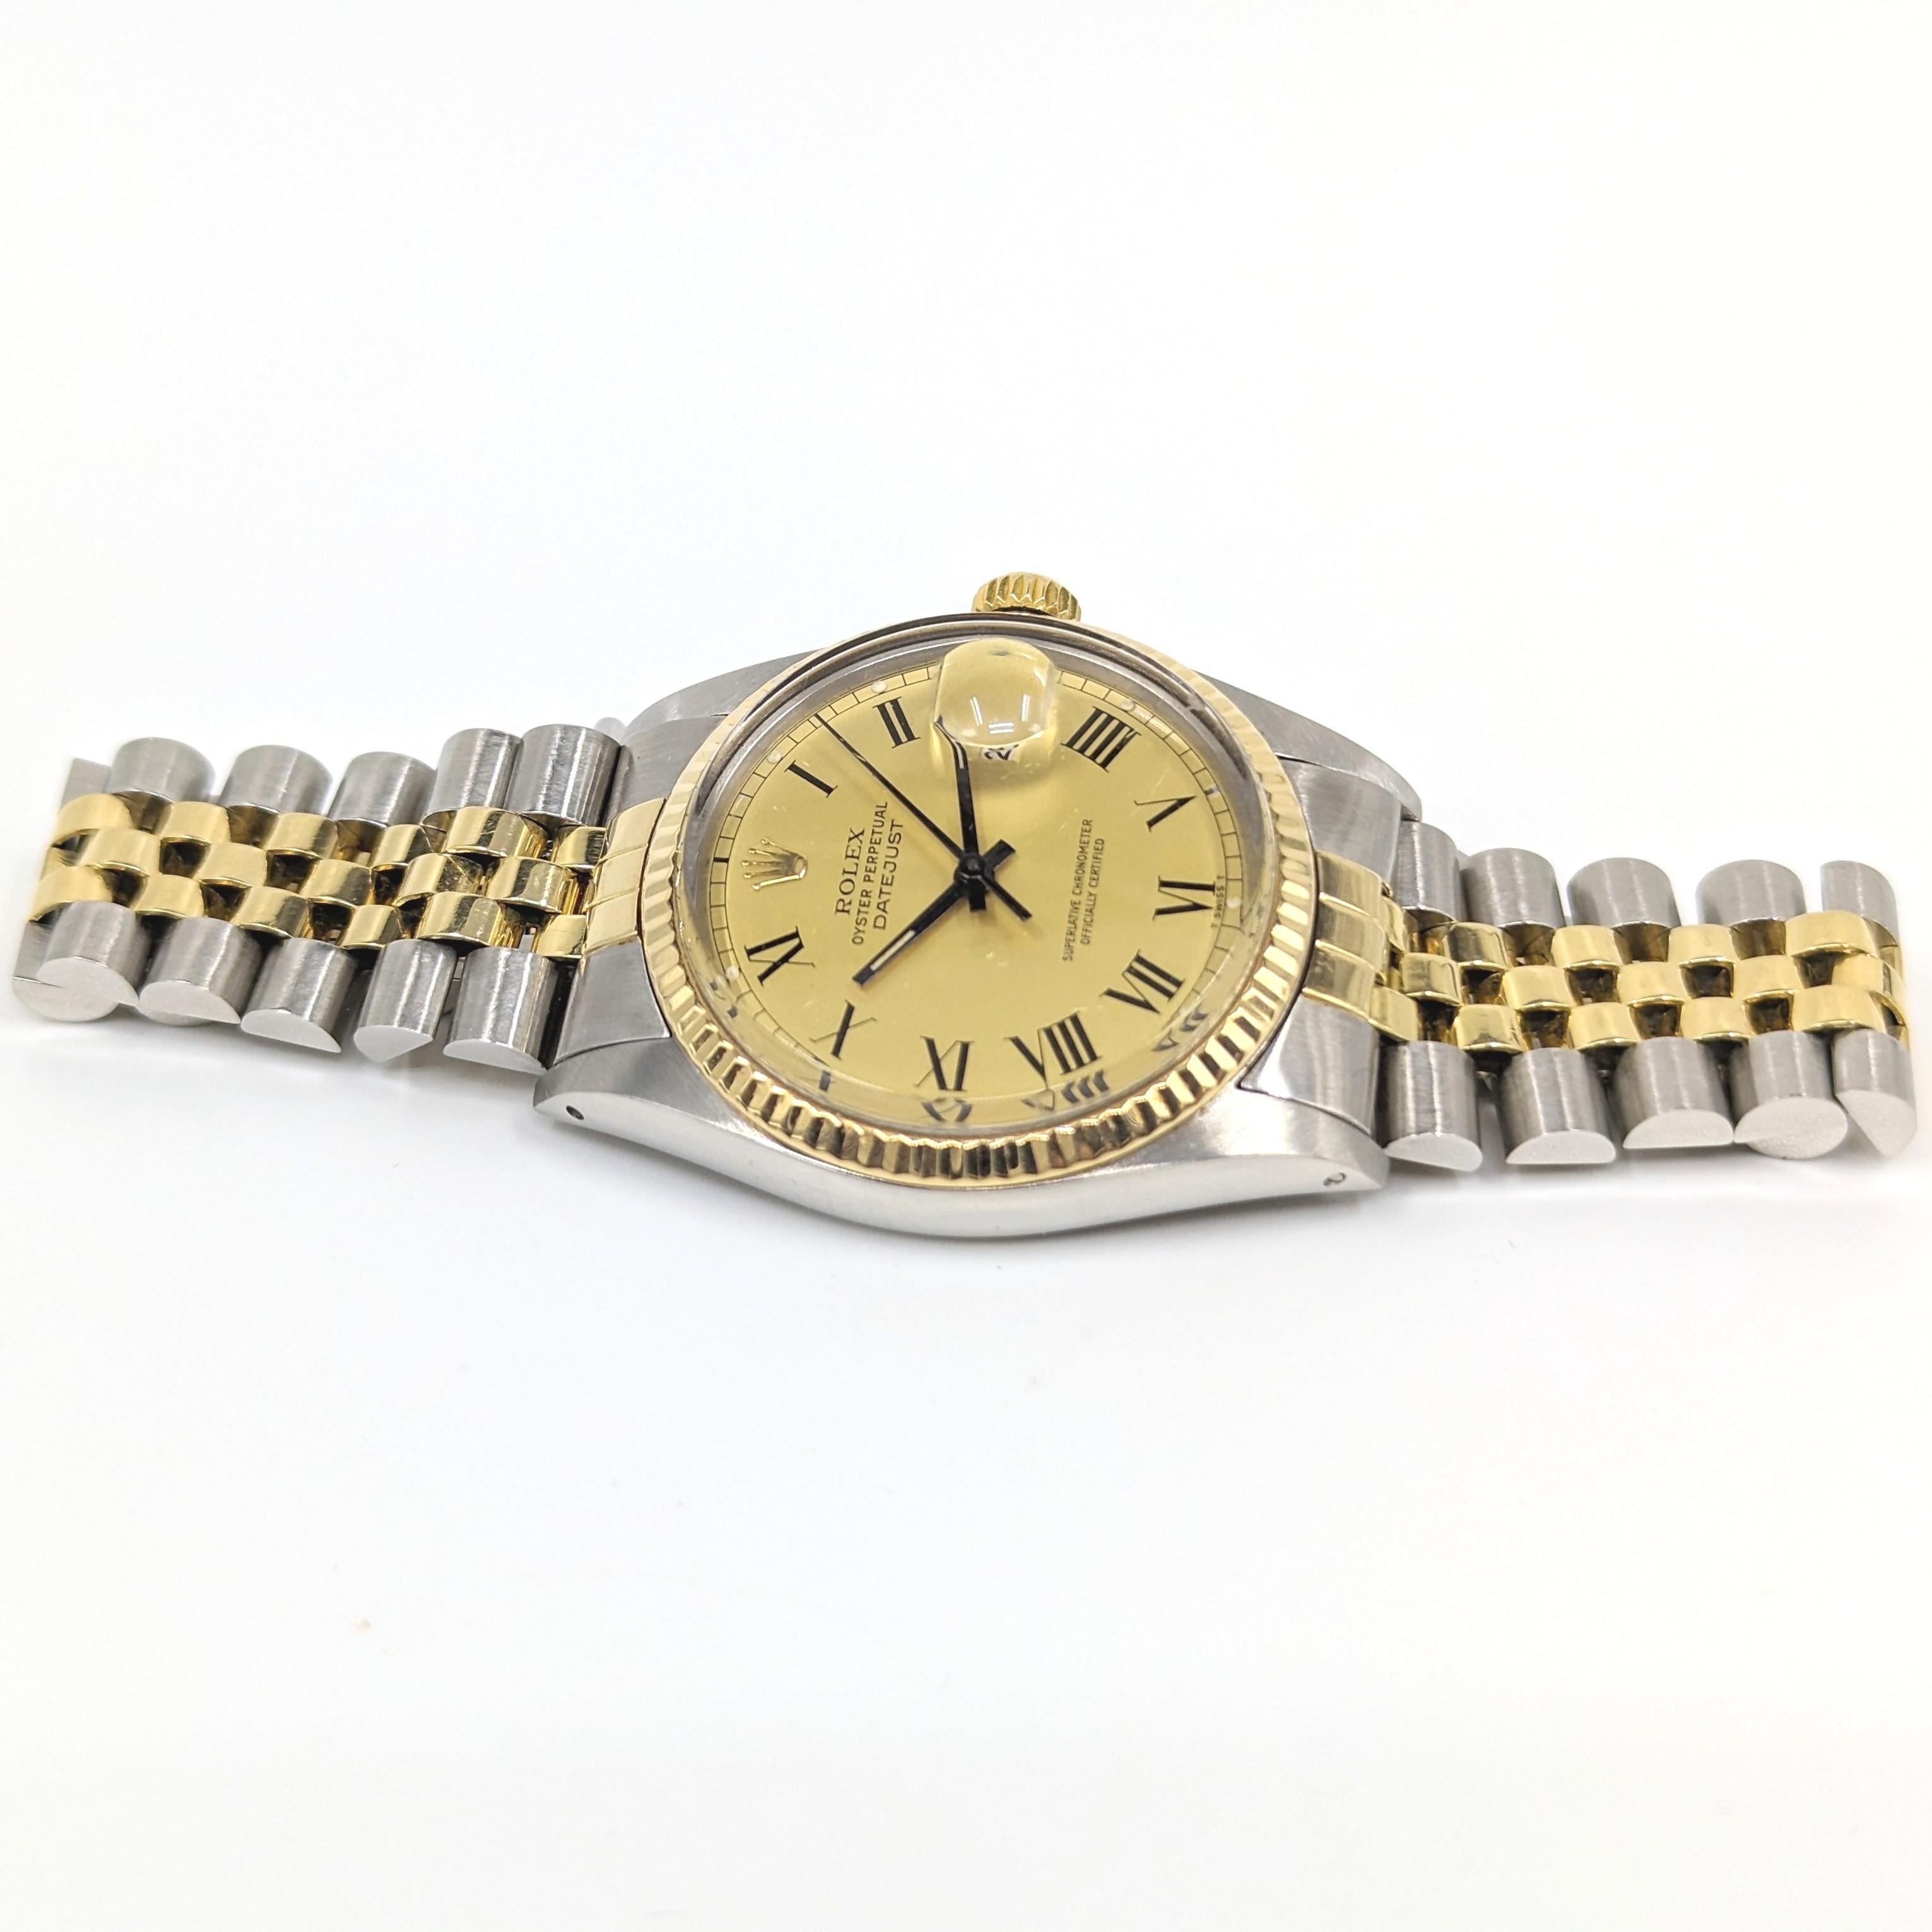 Women's or Men's Rolex Oyster Perpetual Datejust 18k/SS YG 2tone Watch Collectible Buckley 16013 For Sale